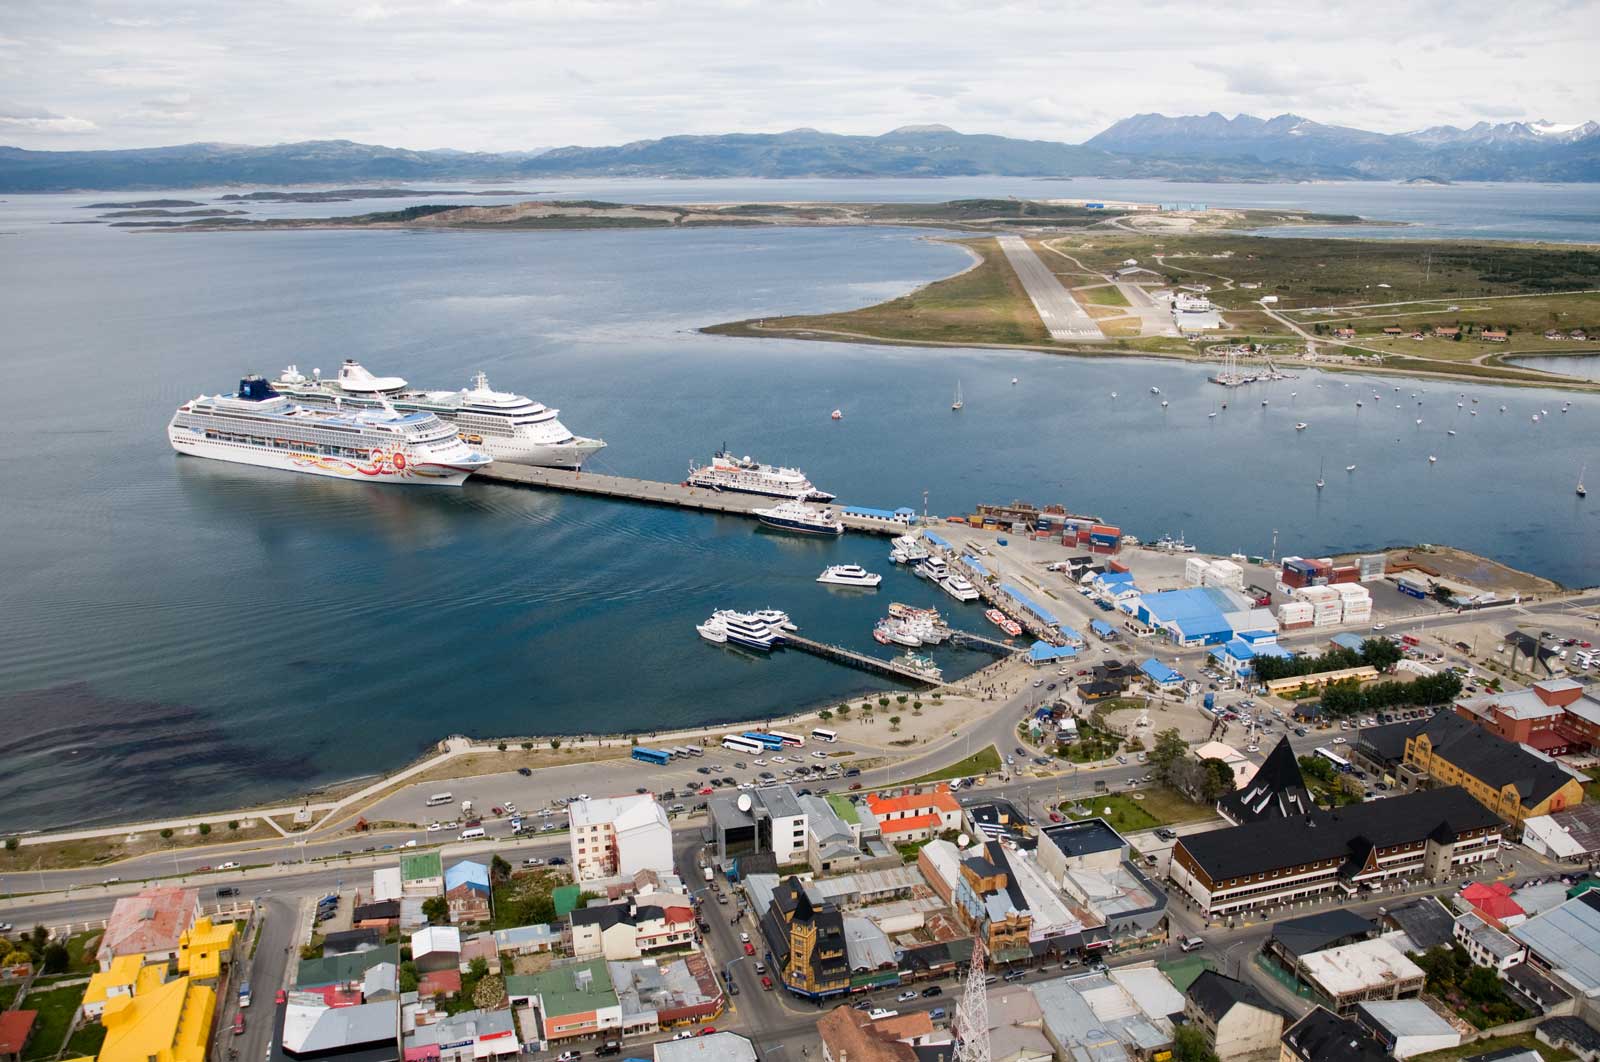 Tours in Ushuaia: ideas for your trip